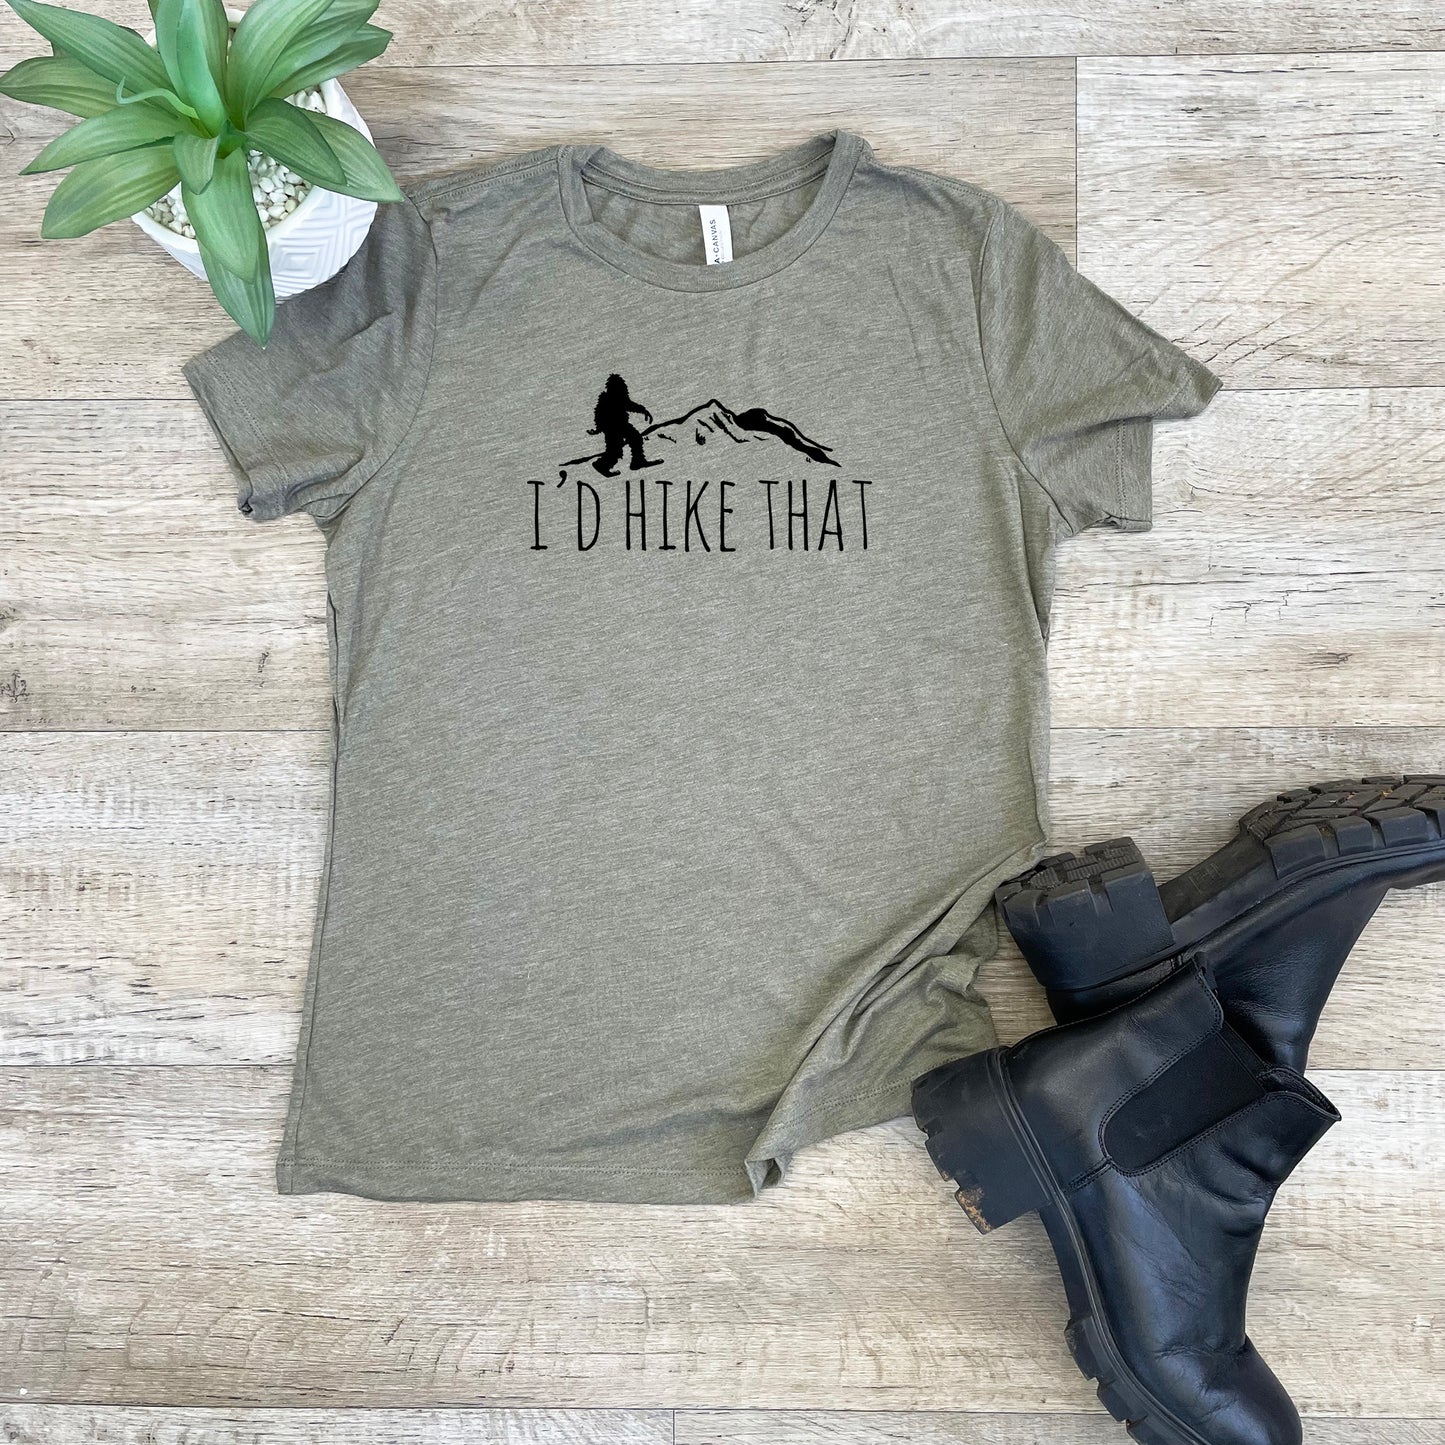 I'd Hike That - Women's Crew Tee - Olive or Dusty Blue